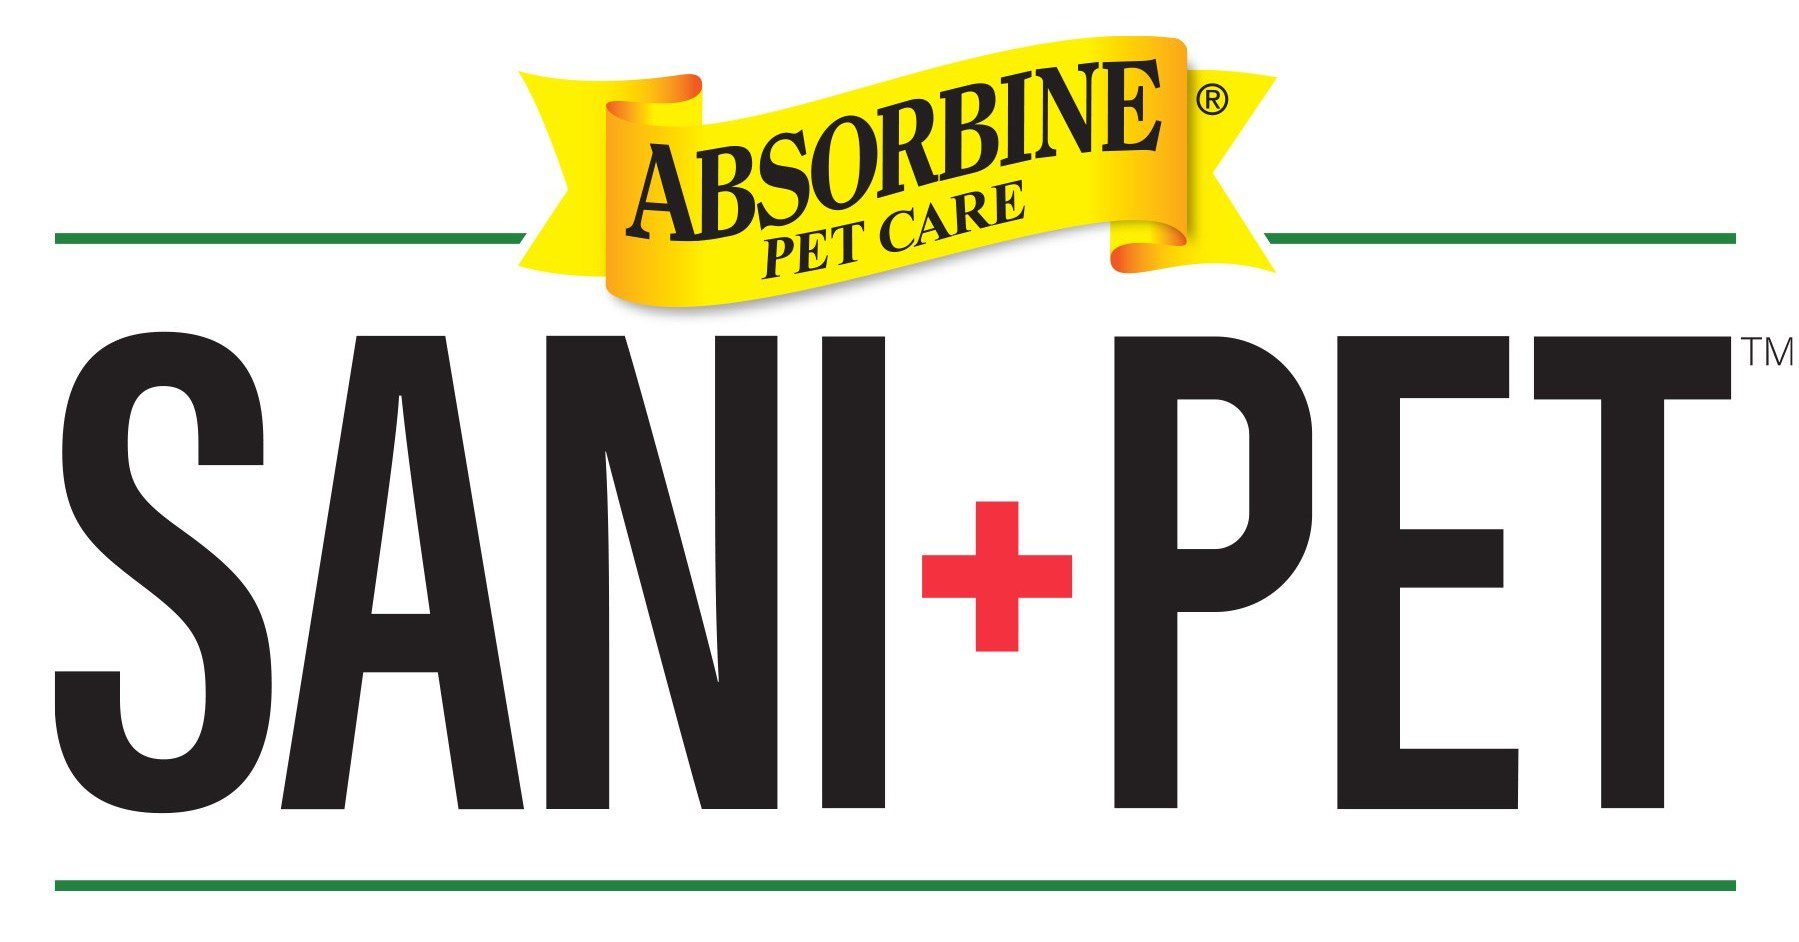 A picture of the logo for absorbine pet care.